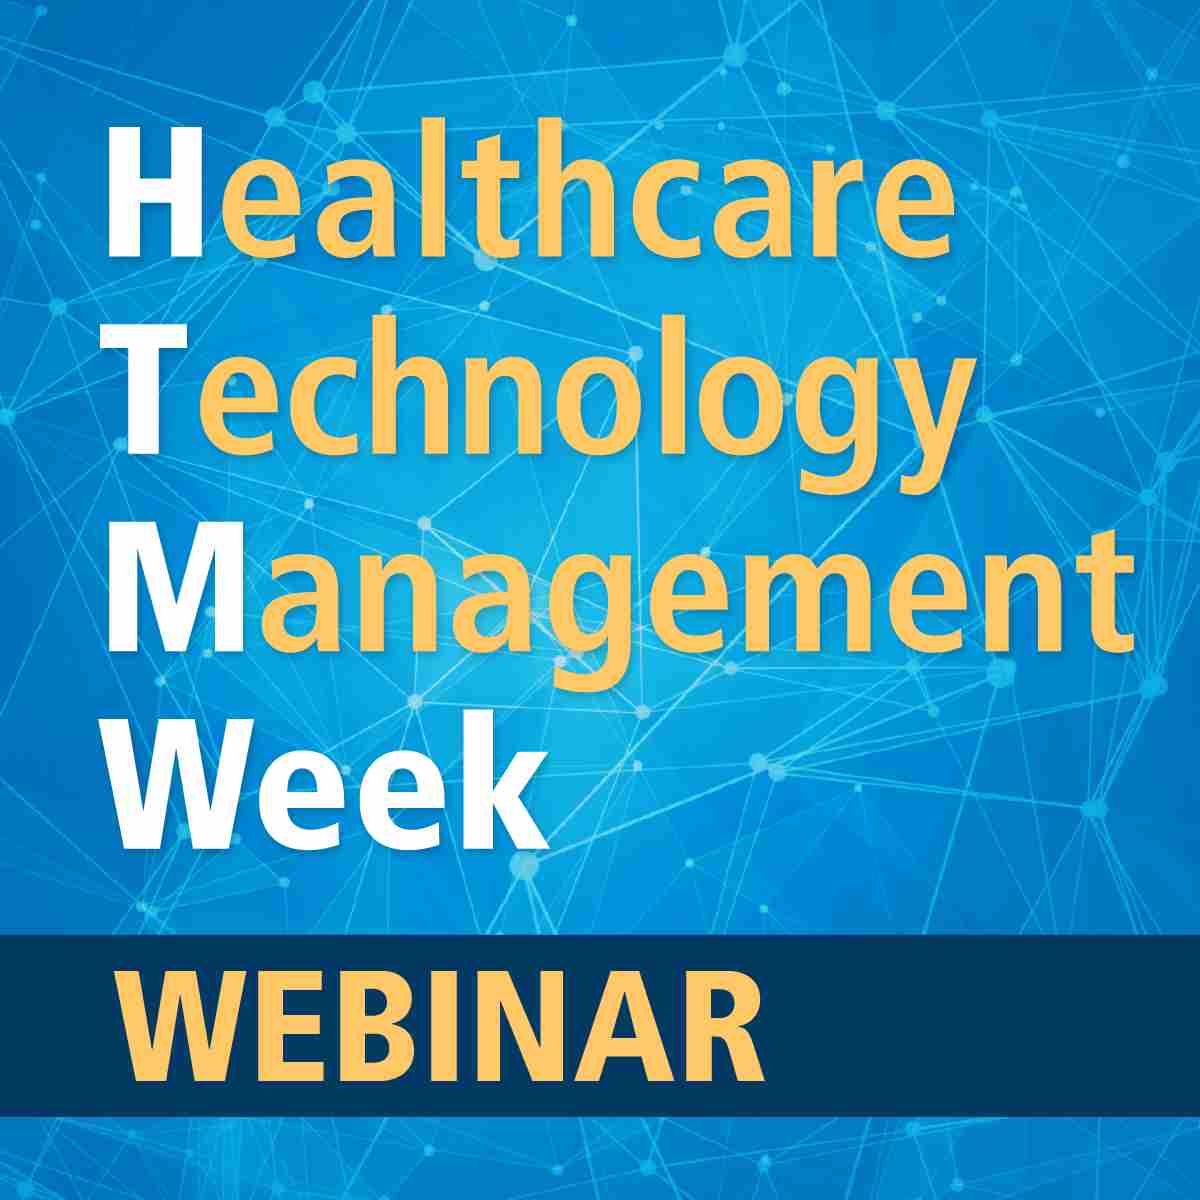 HTM Week Webinar: Compliance Issues in HTM and Keys to Success